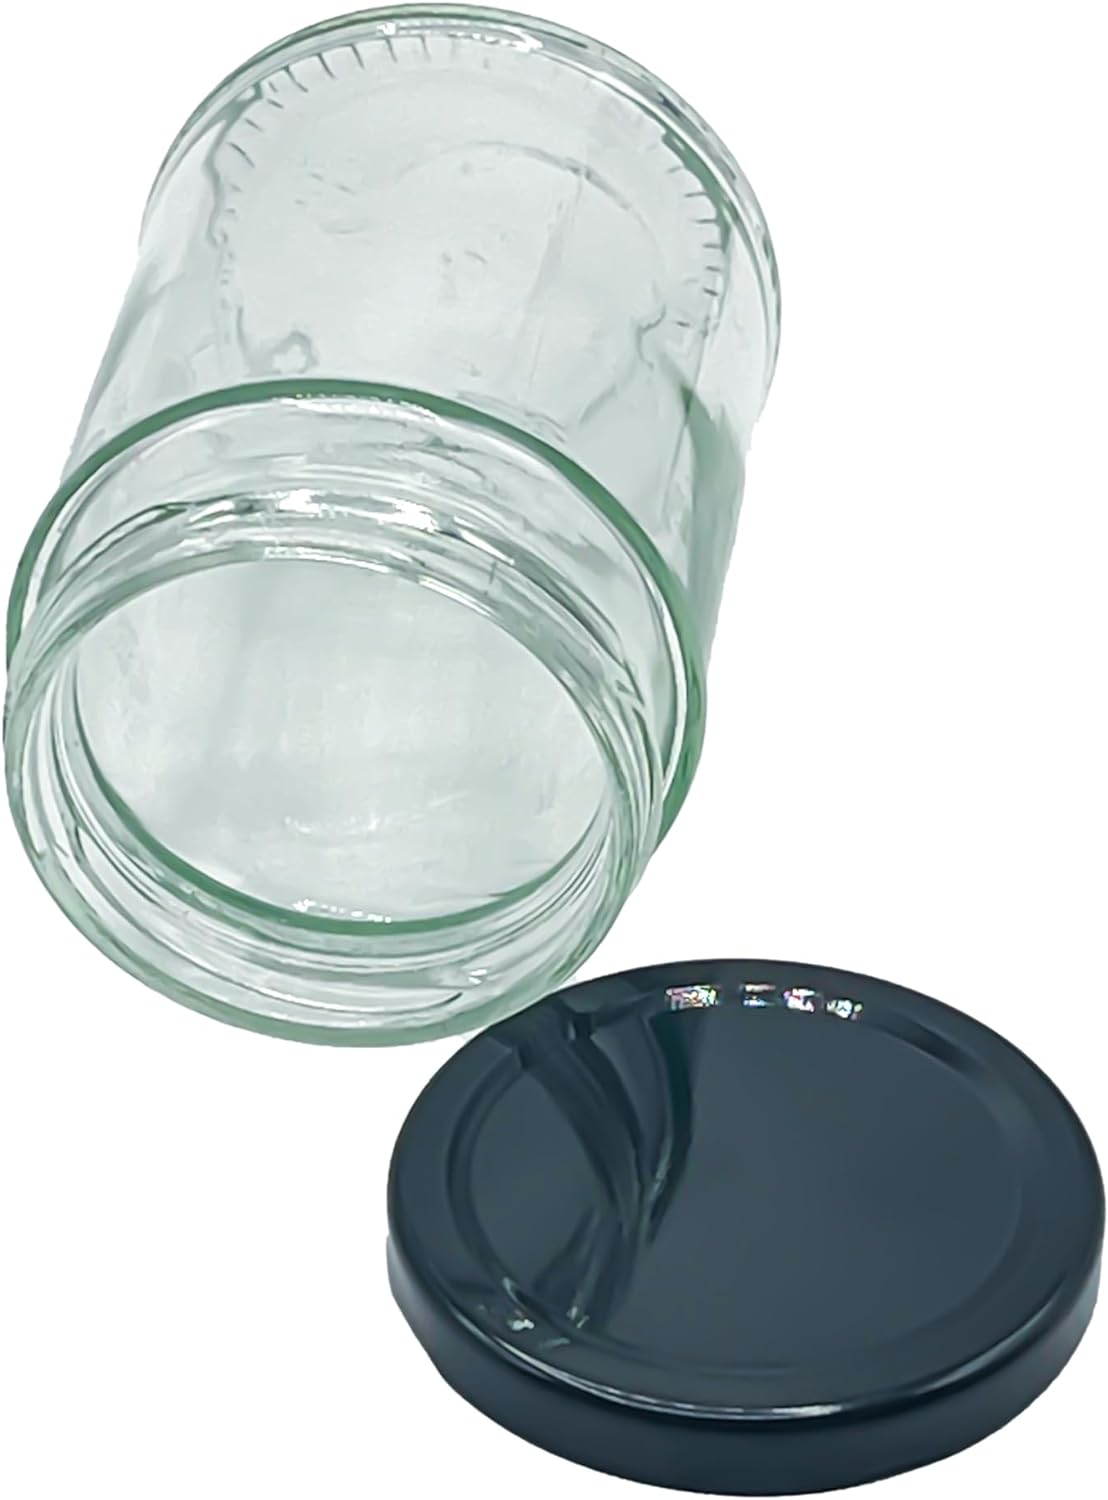 Airtight 190ml Round Small Glass Jars with Black Lids - 24 Pack